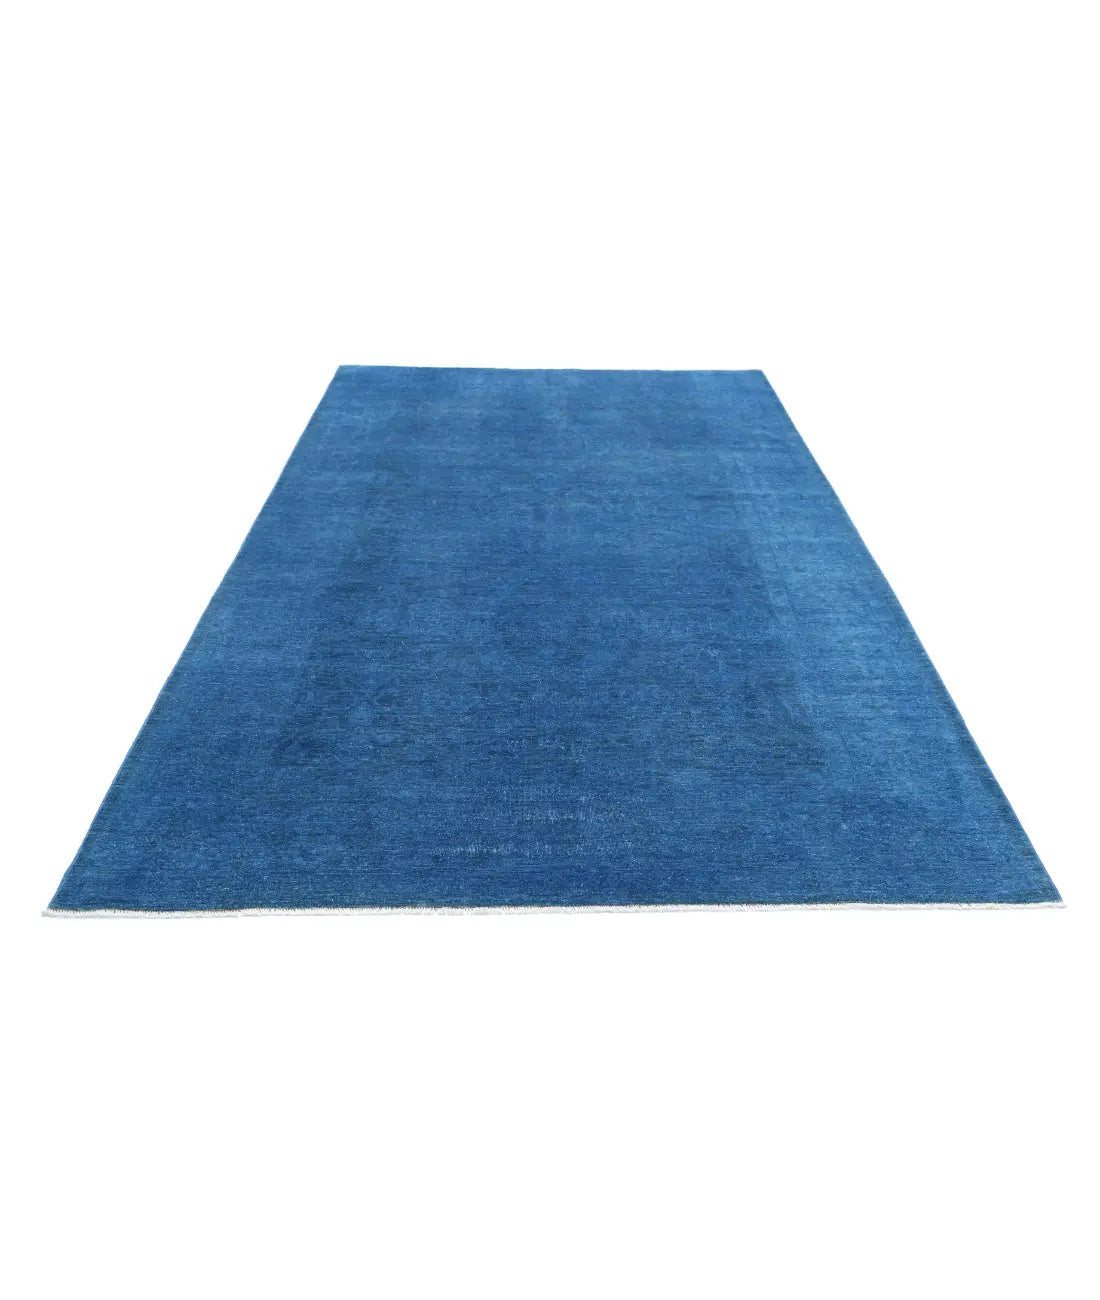 Hand Knotted Overdye Wool Rug - 5'11'' x 9'9''